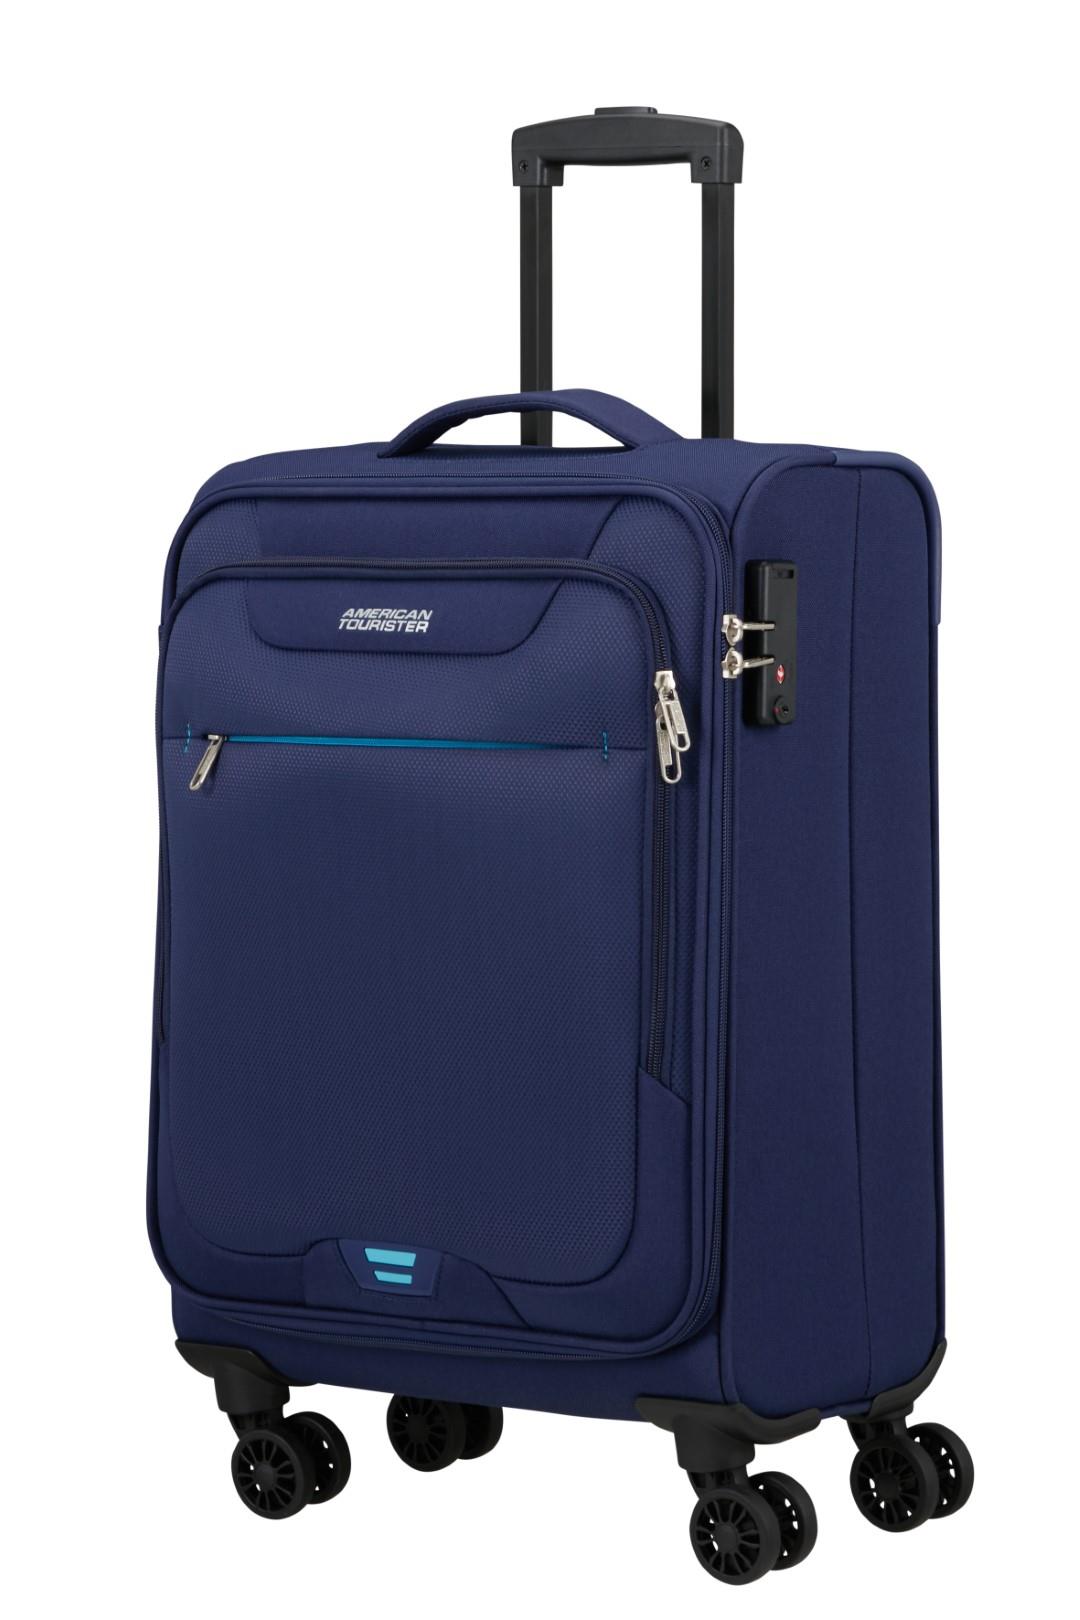 American Tourister Trolley Street Roll 55cm navy